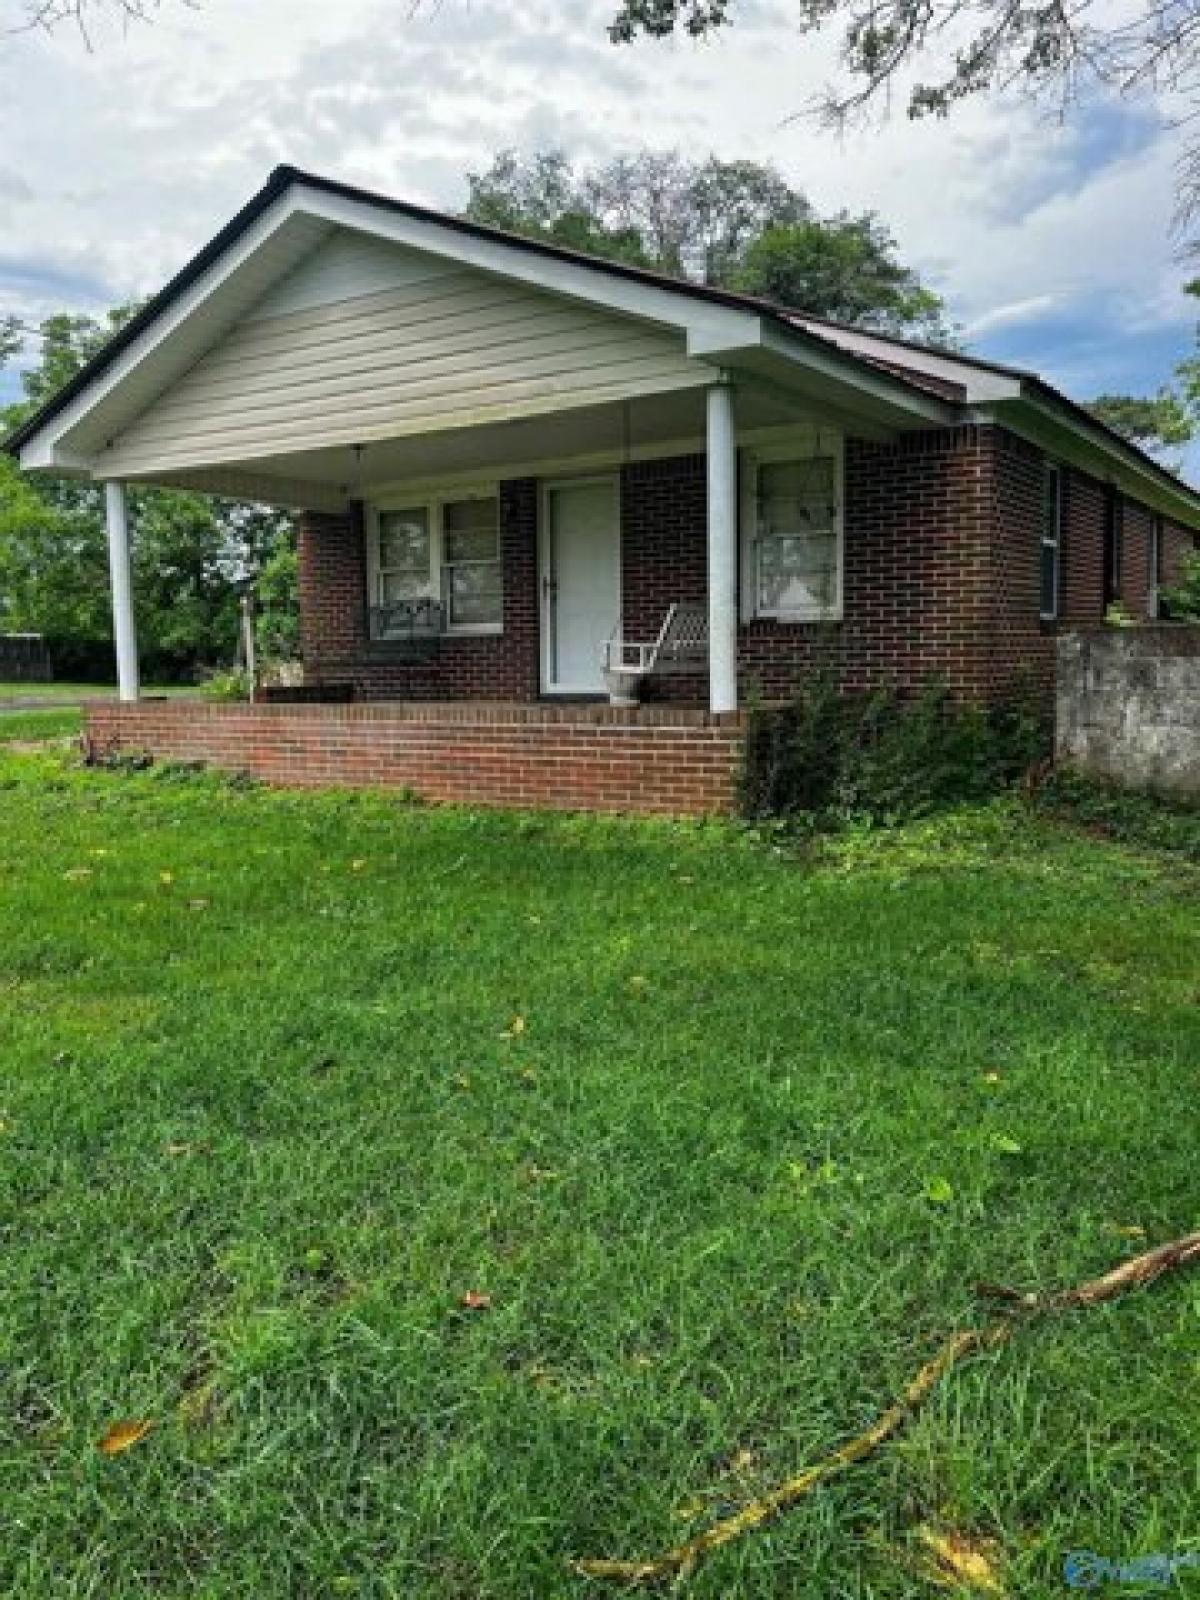 Picture of Home For Sale in Crossville, Alabama, United States